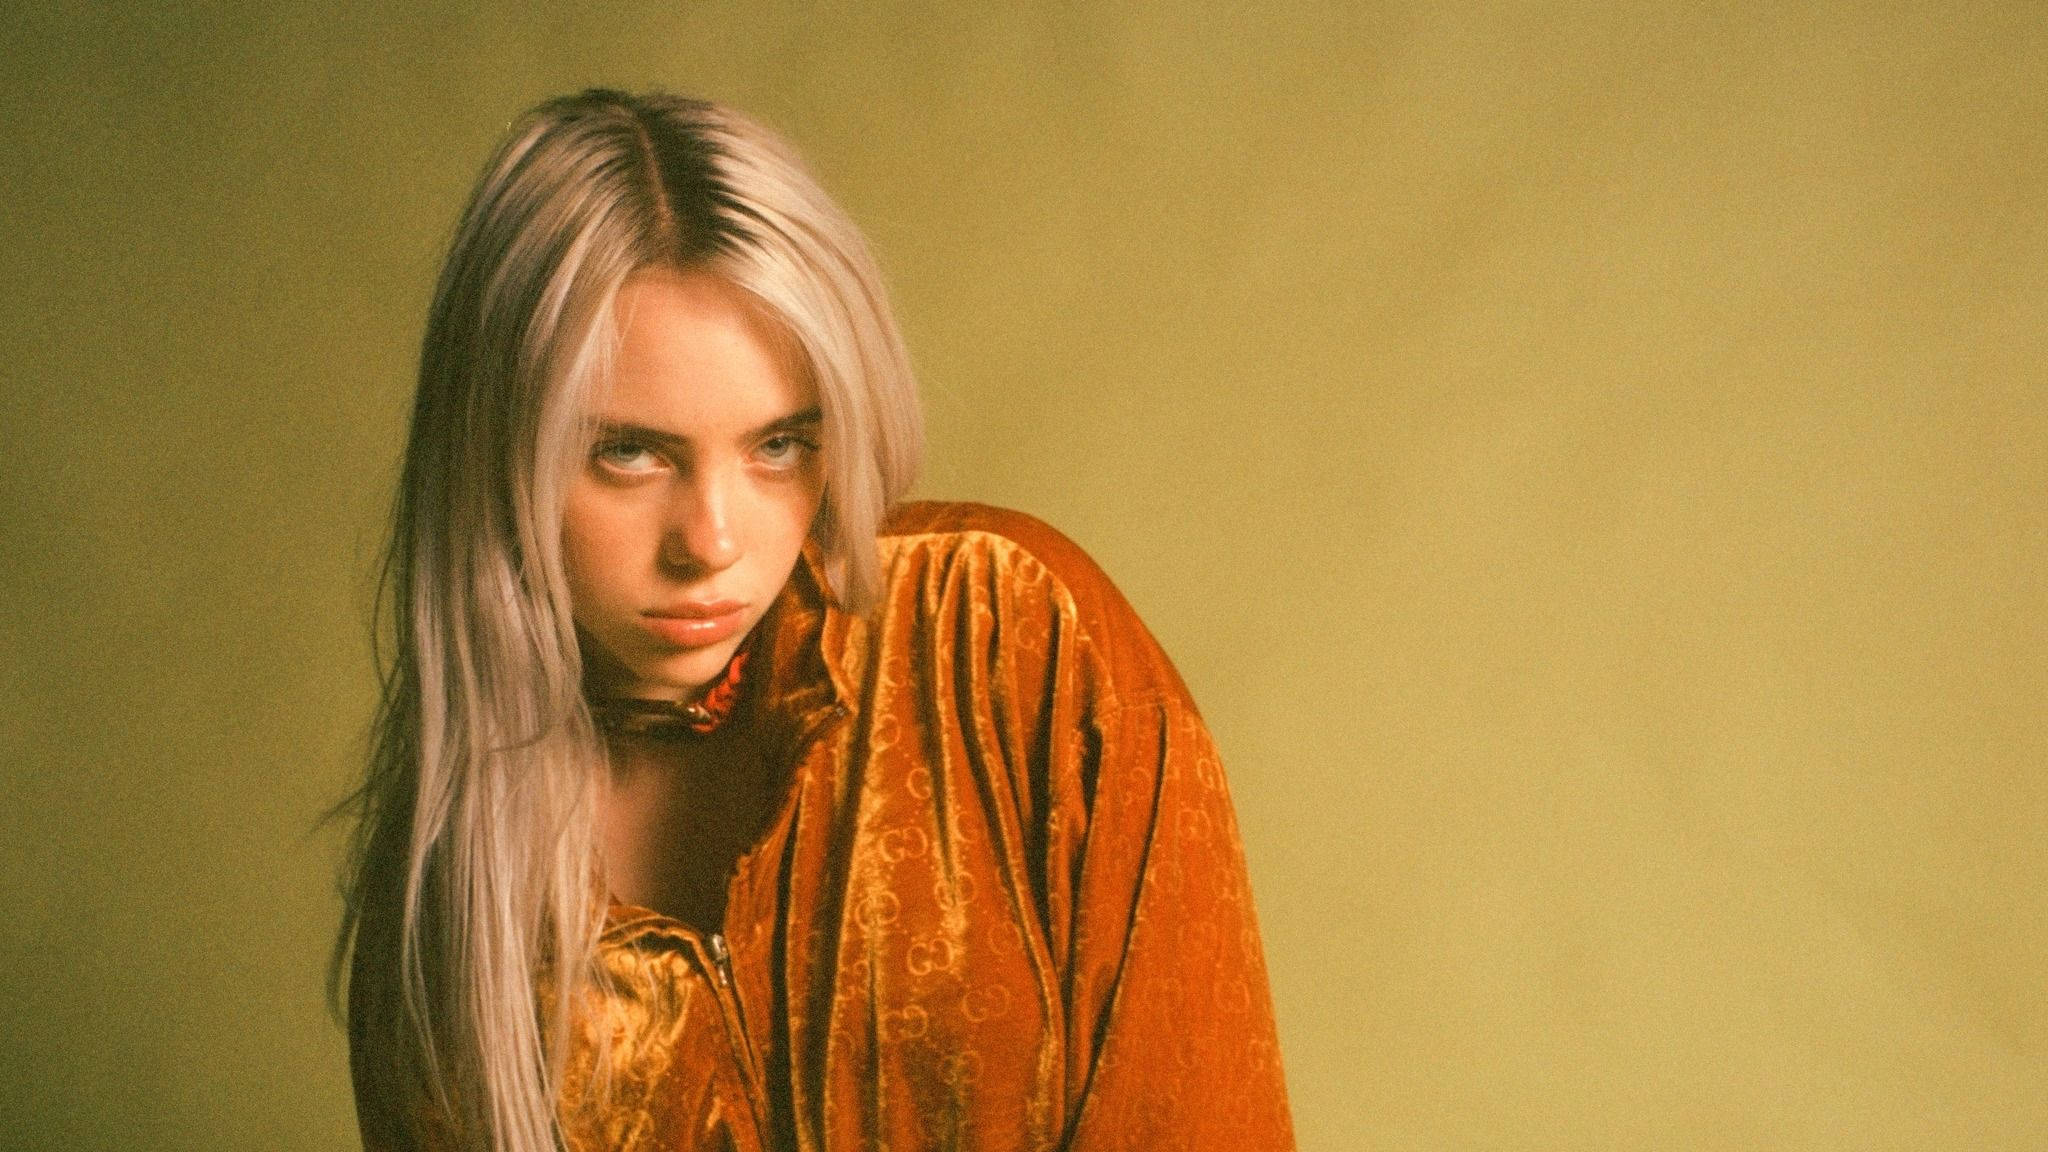 Aesthetic Billie Eilish In Orange Outfit Background